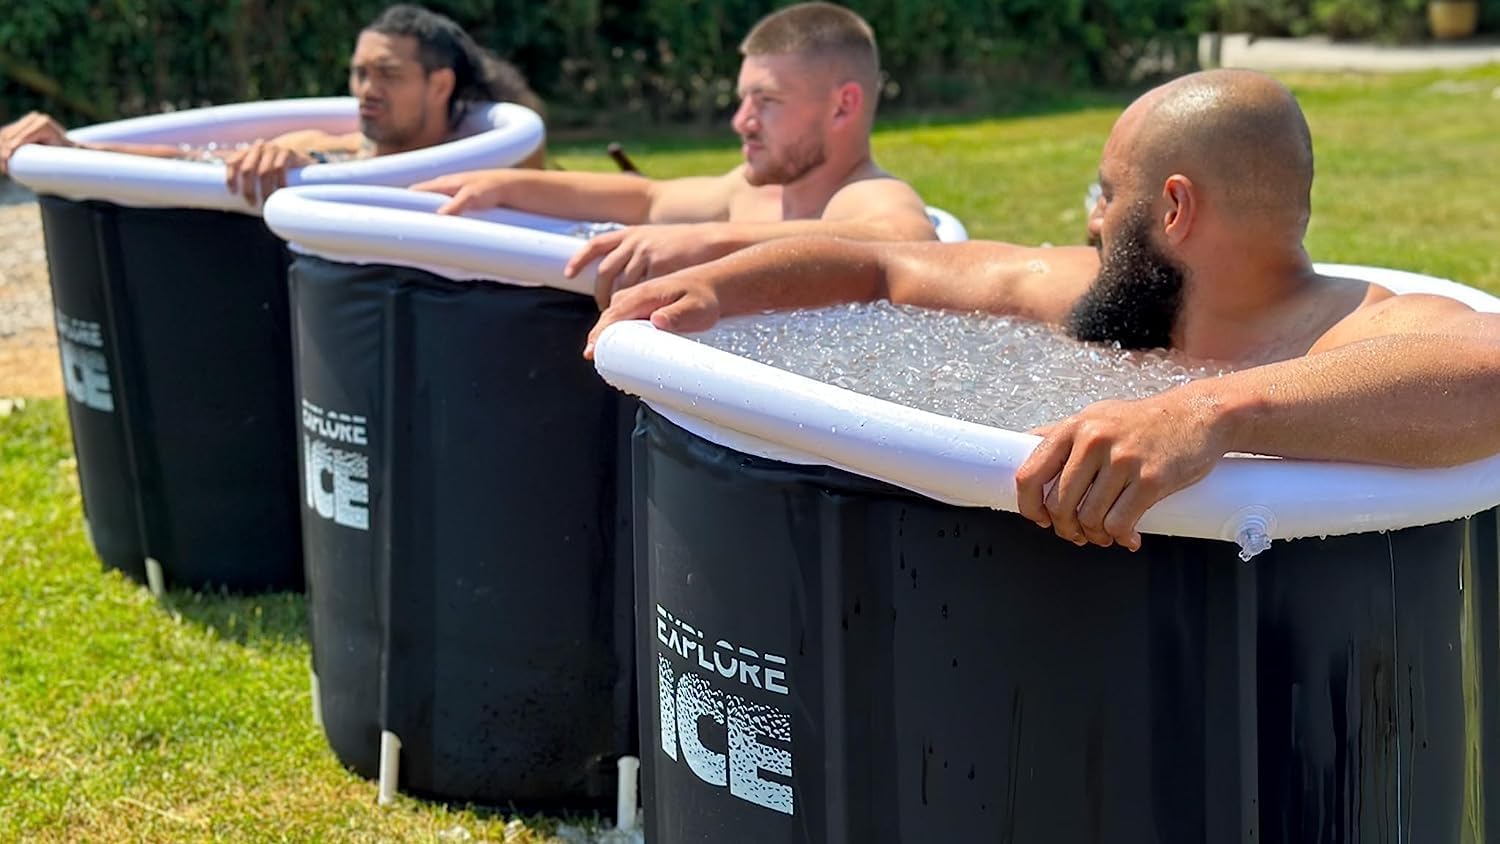 Ice Bath Portable Ice Baths Tub Outdoor Cold Water Therapy